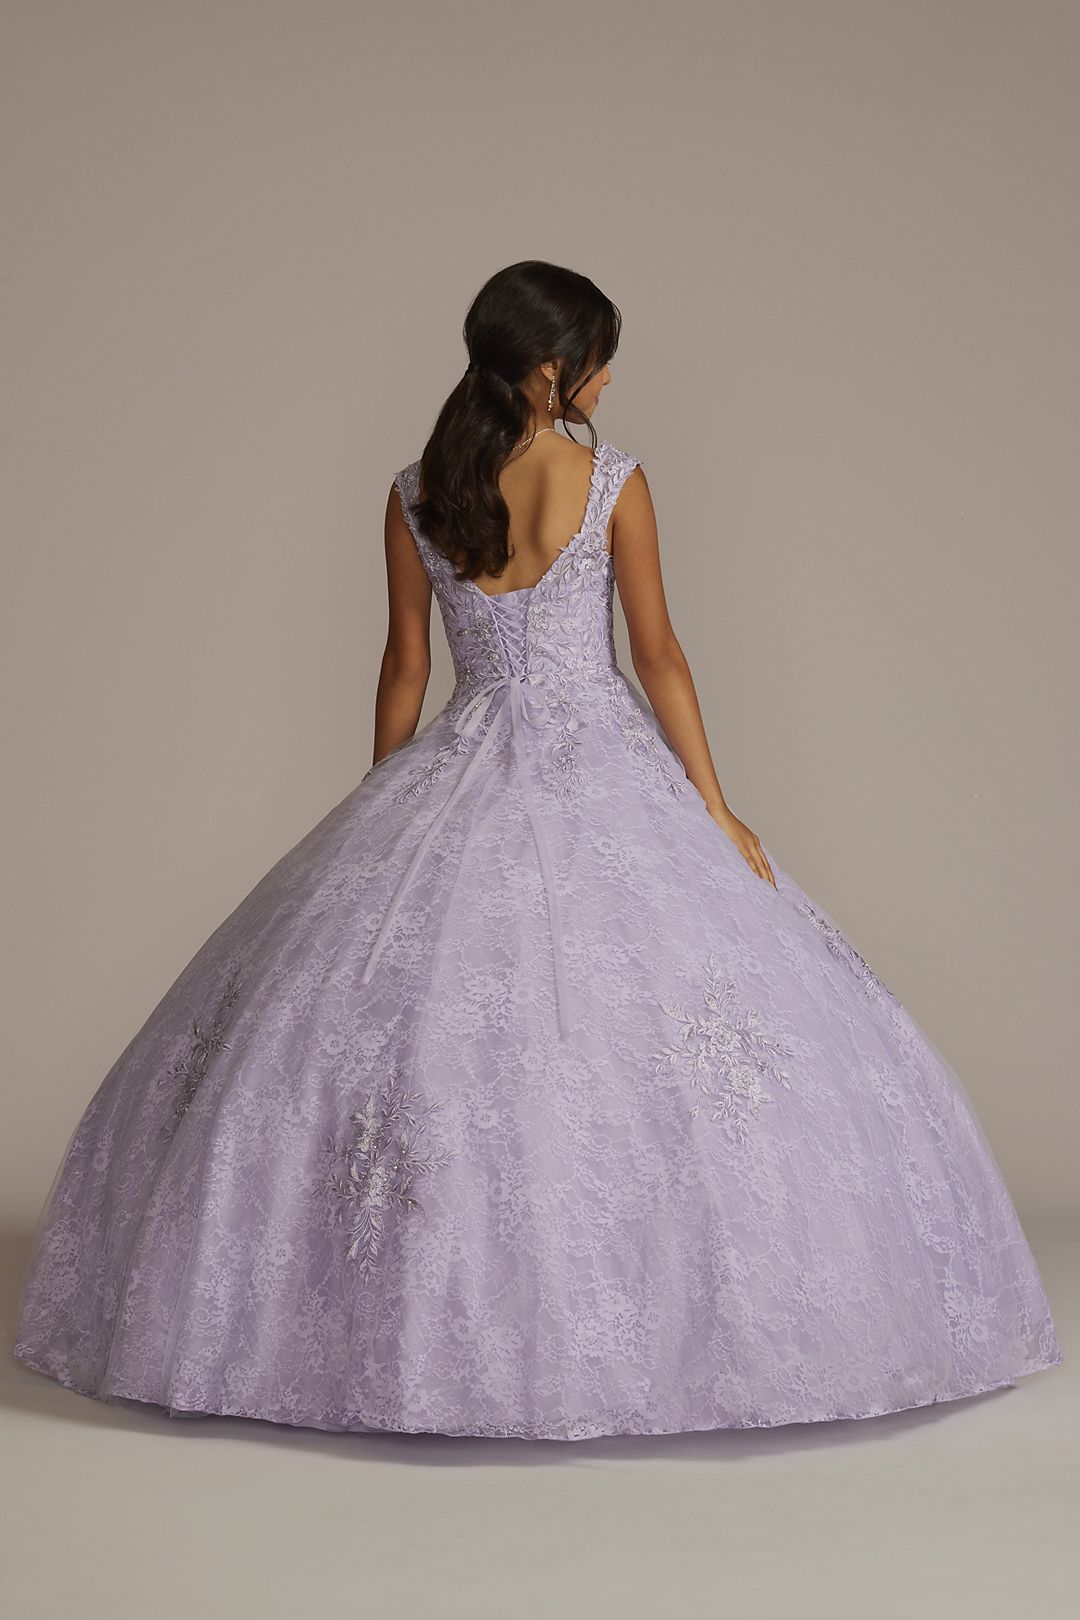 Lace Applique Semi-Cap Sleeve Quince Ball Gown Image 2